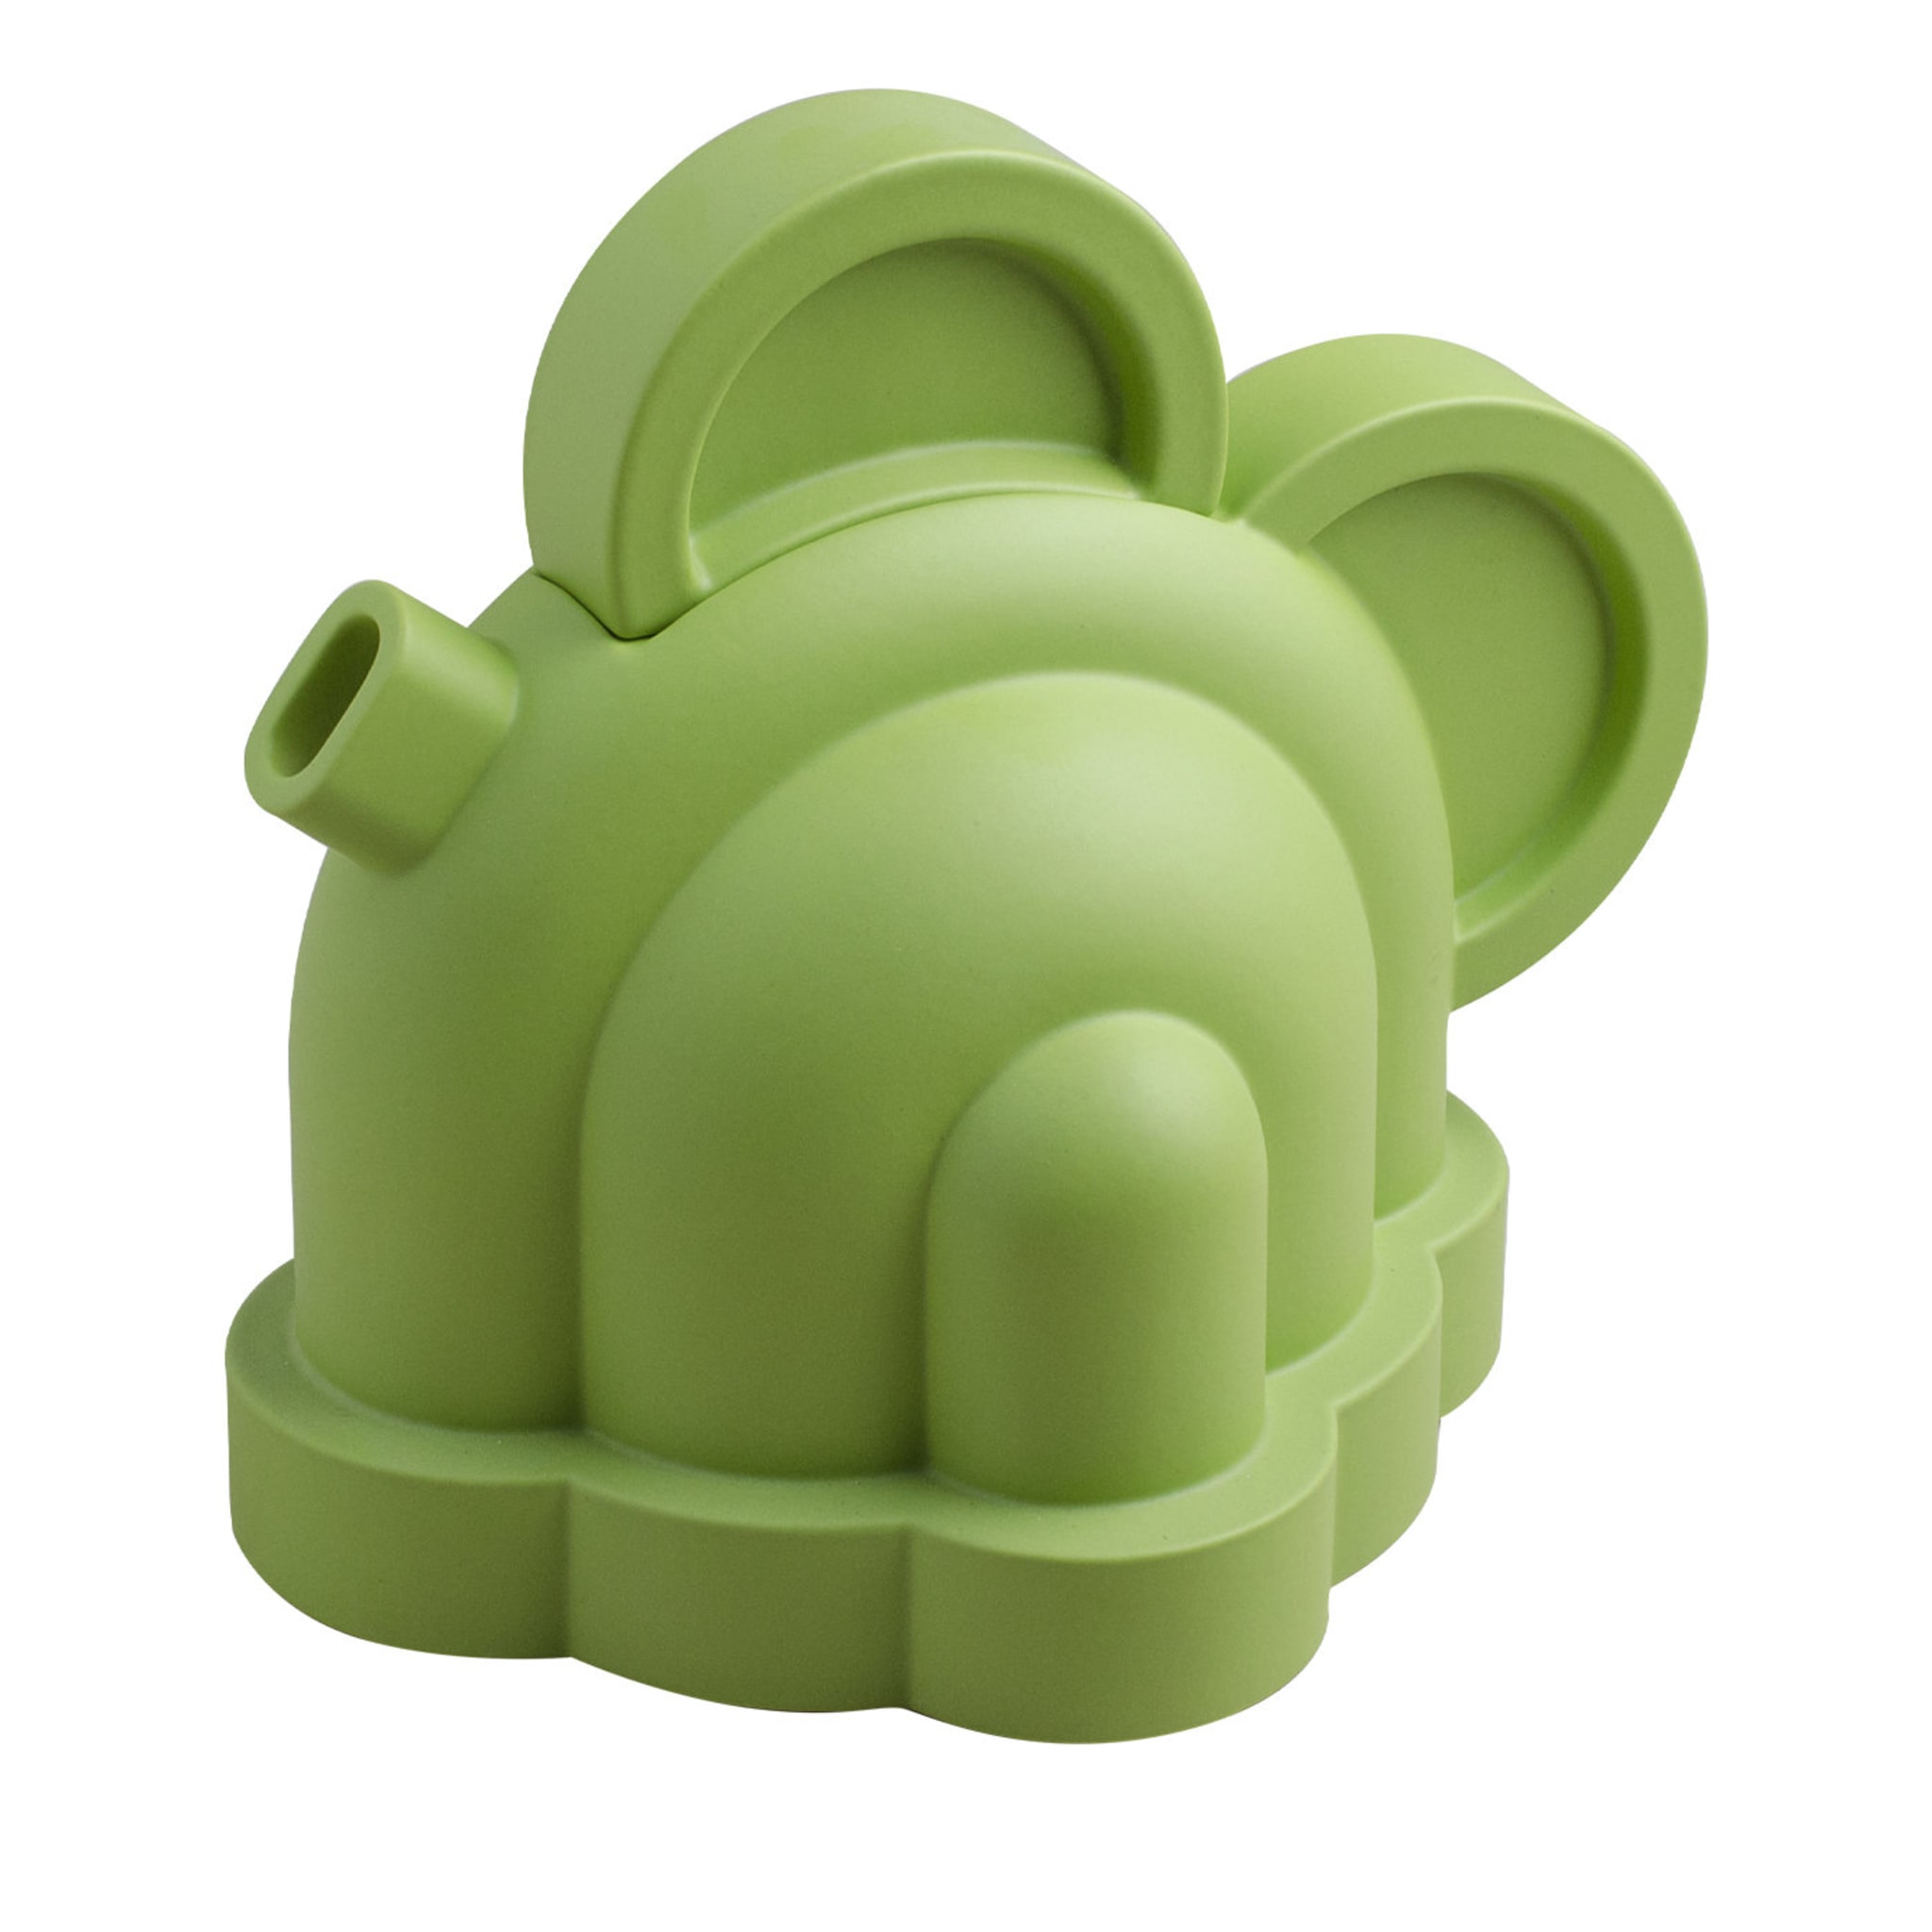 Basilico Teapot by Ettore Sottsass - Main view